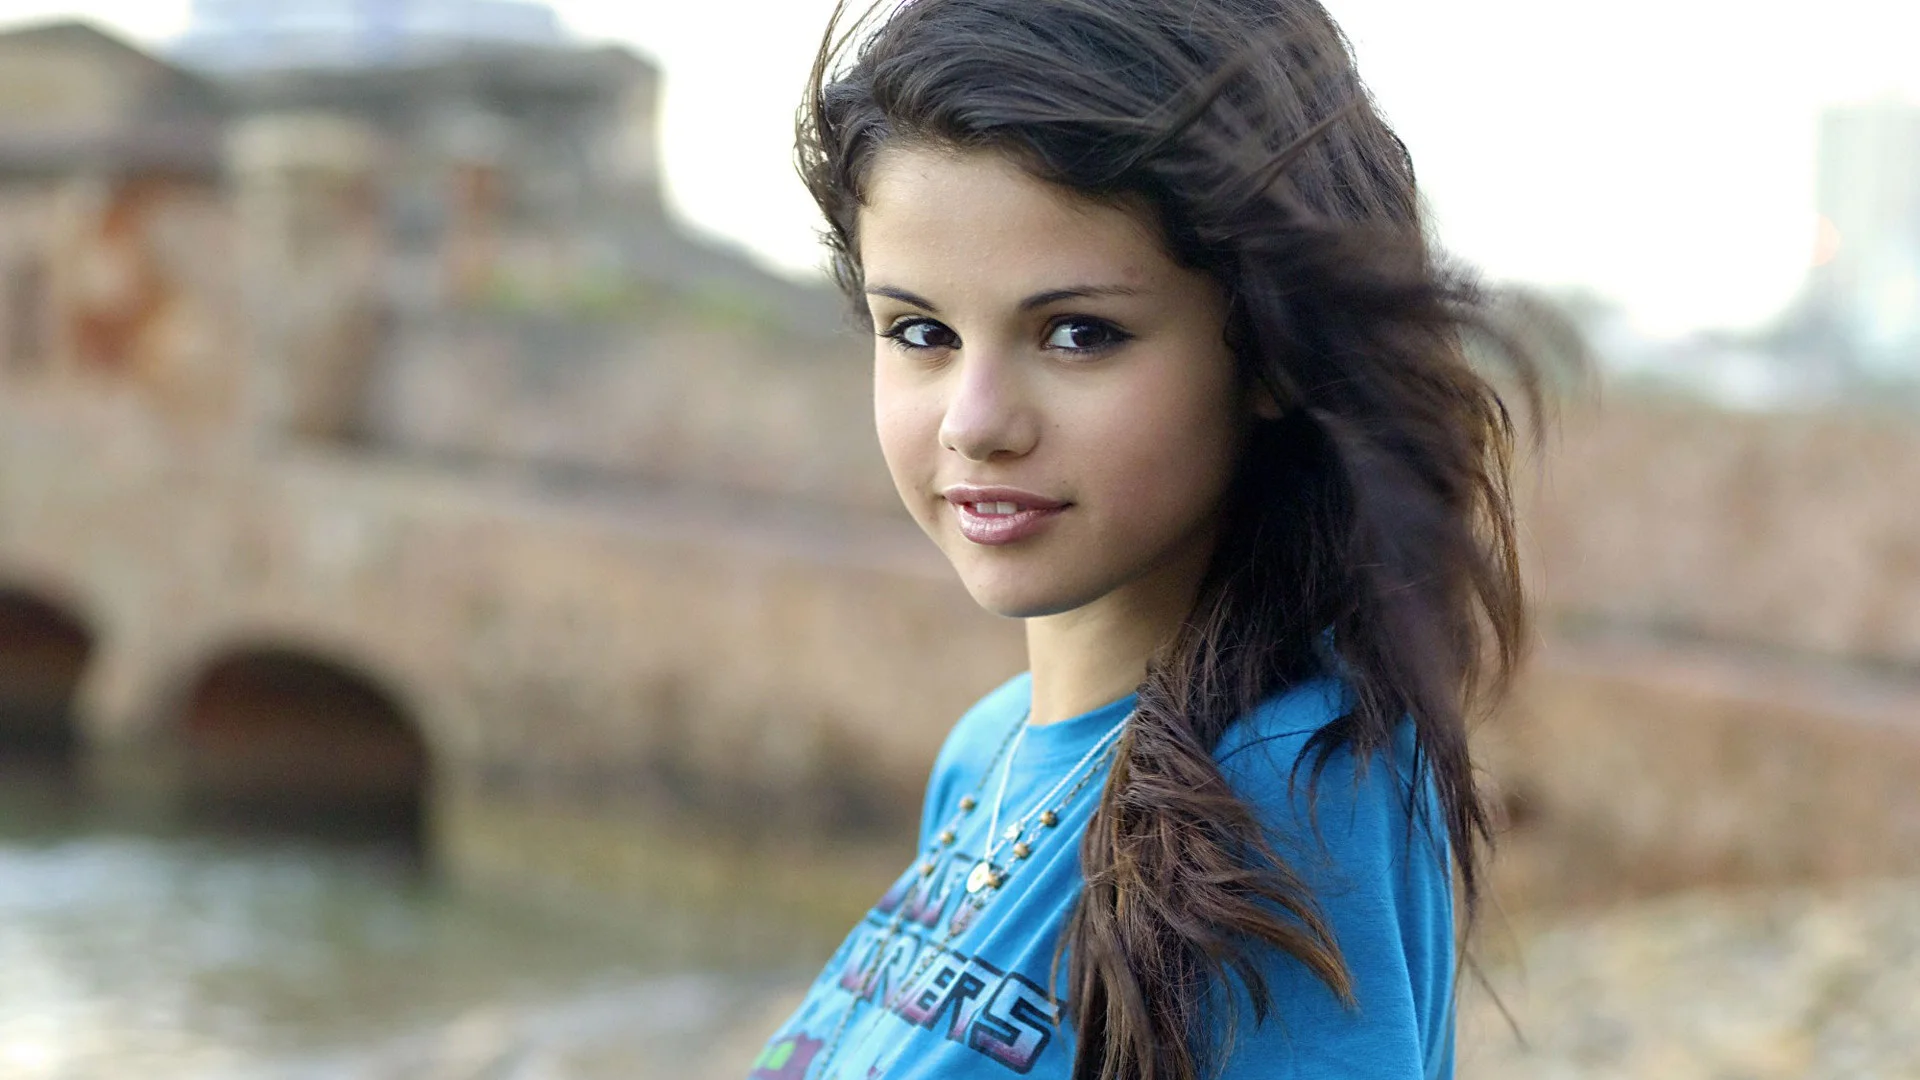 Selena Gomez Wallpapers High Resolution and Quality Download